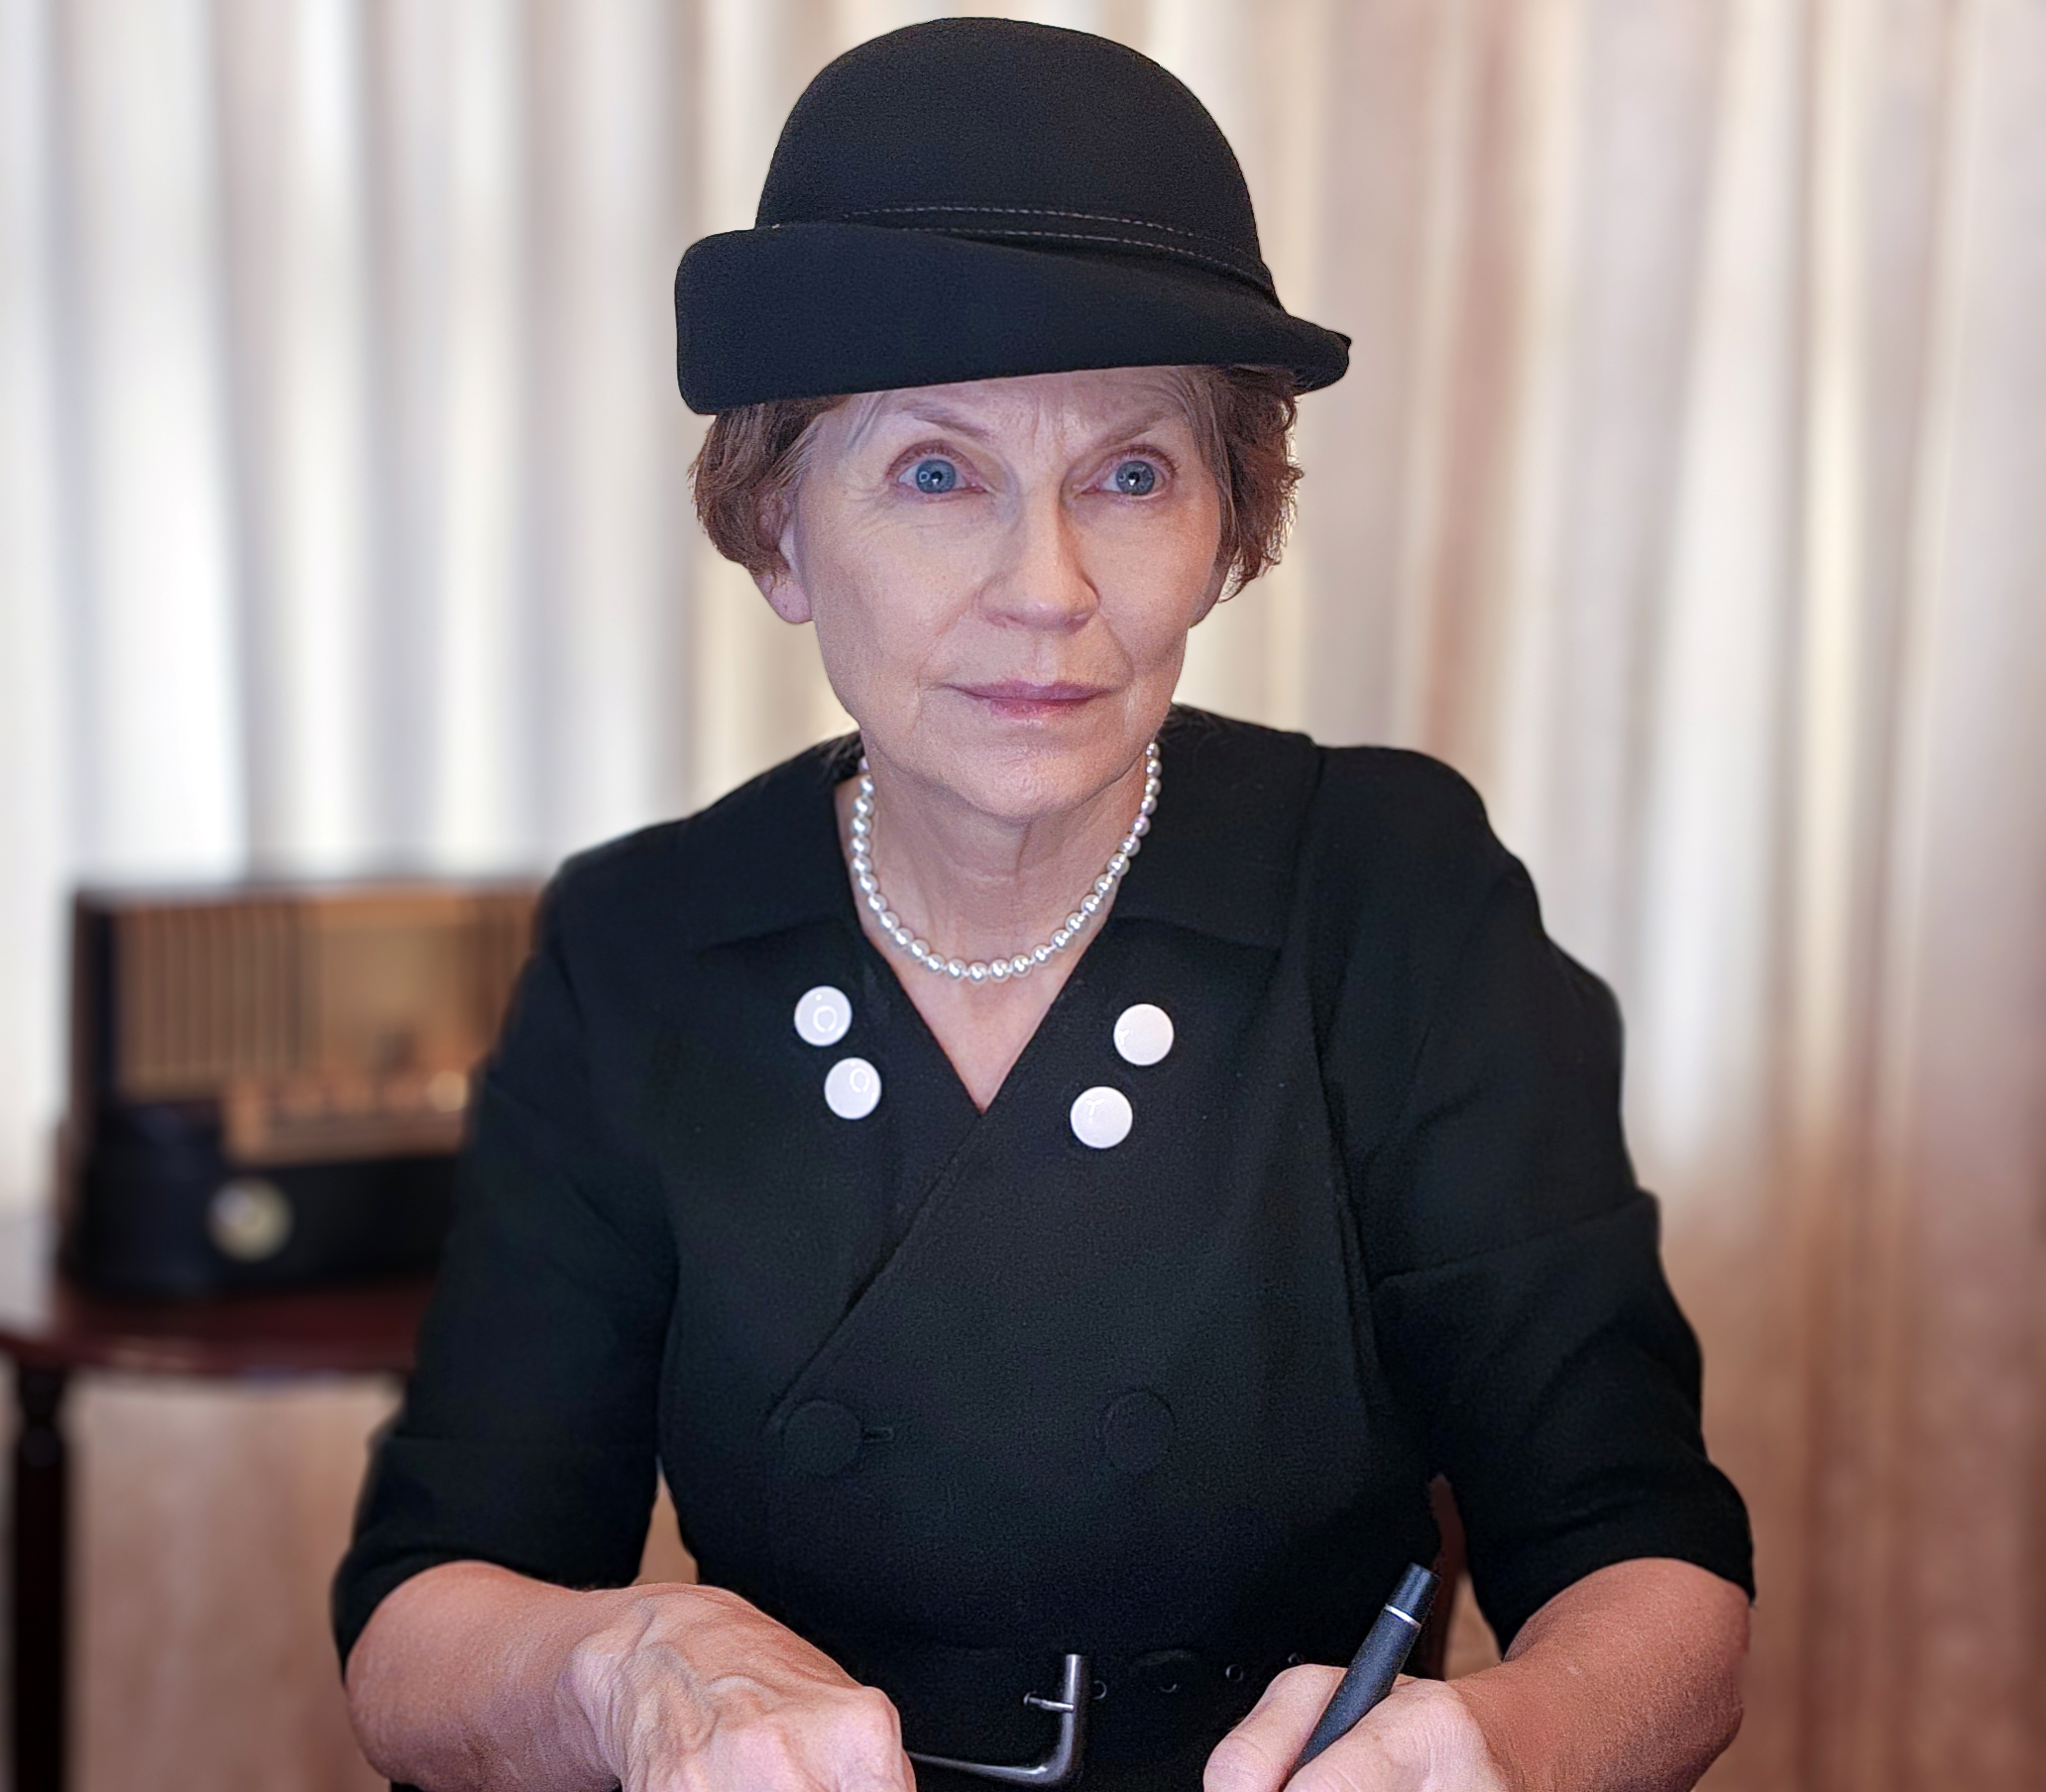 JoAnn Peterson as Frances Perkins, with reddish-brown hair and blue eyes seated with a pen in her hand, wearing a black dress with black and white buttons, a pearl necklace, and a black hat